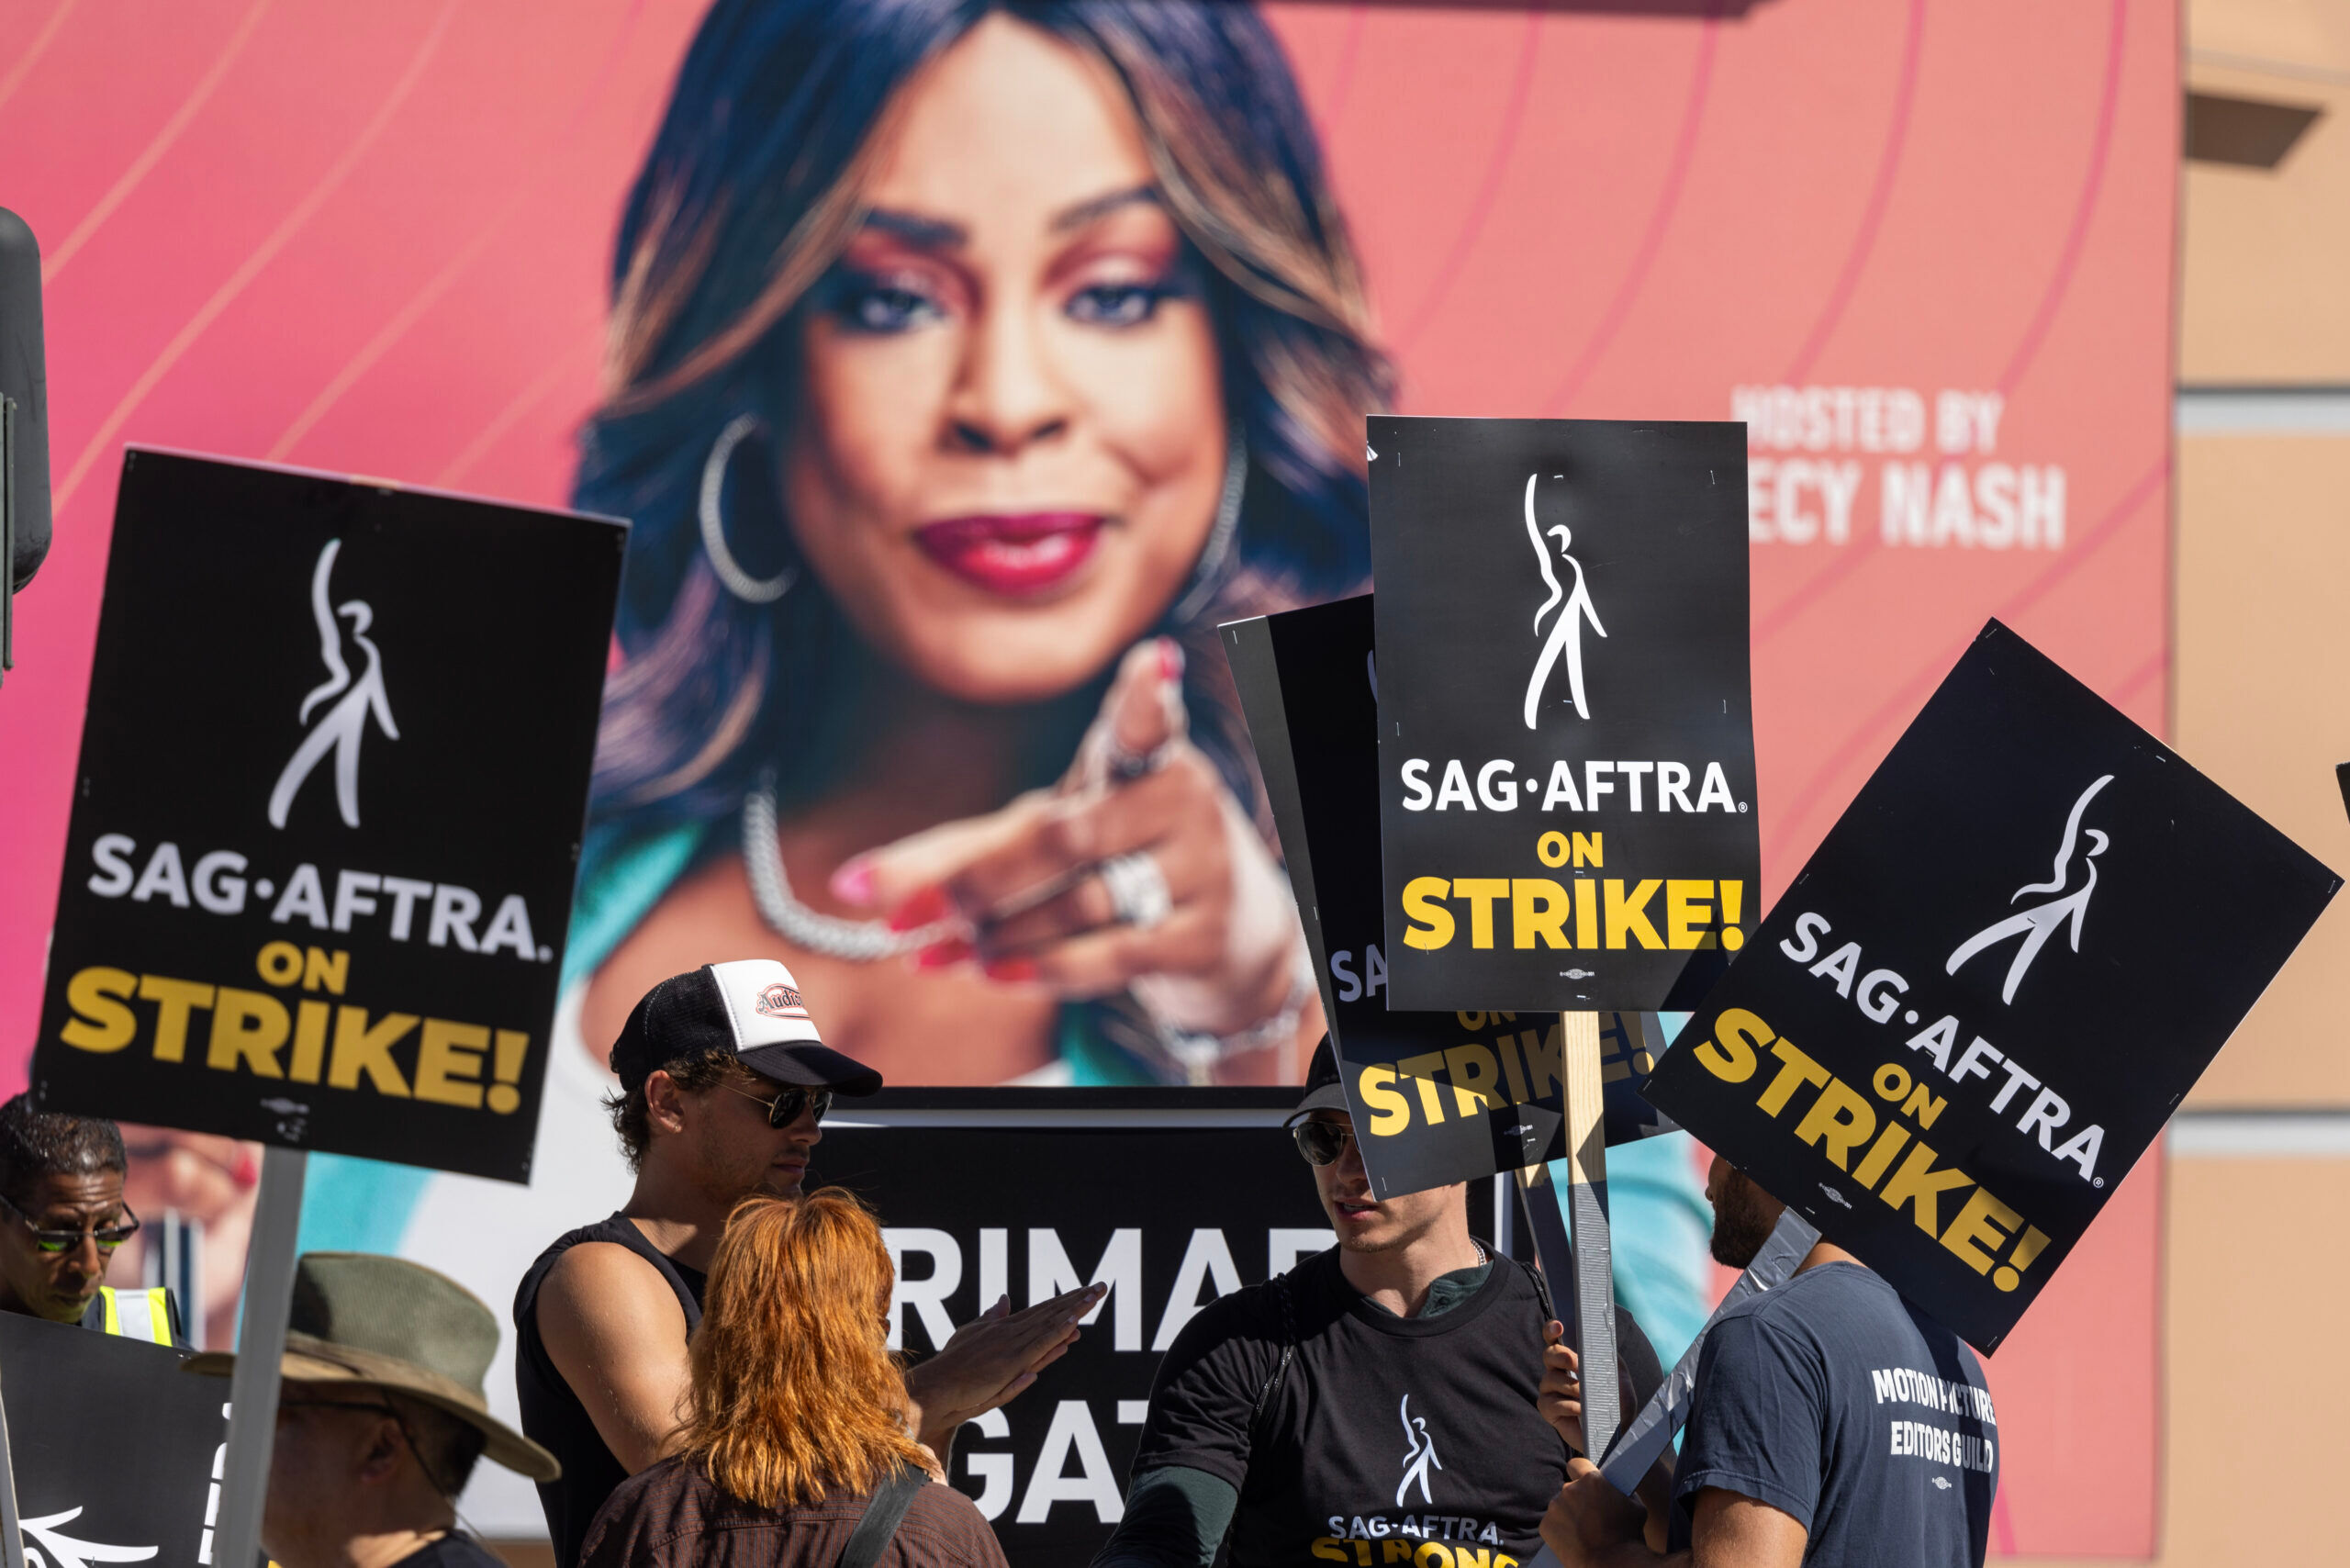 LOS ANGELES, CALIFORNIA - JULY 14: Members of the Hollywood actors SAG-AFTRA union walk a picket line near an image of "Don't Forget the Lyrics" host Niecy Nash outside of FOX Studios on the first day of the actors' strike on July 14, 2023 in Los Angeles, California. Members of SAG-AFTRA, Hollywood’s largest union which represents actors and other media professionals, joined striking WGA (Writers Guild of America) workers in the first joint walkout against the studios since 1960. The strike could shut down Hollywood productions completely with writers in the third month of their strike against the Hollywood studios.